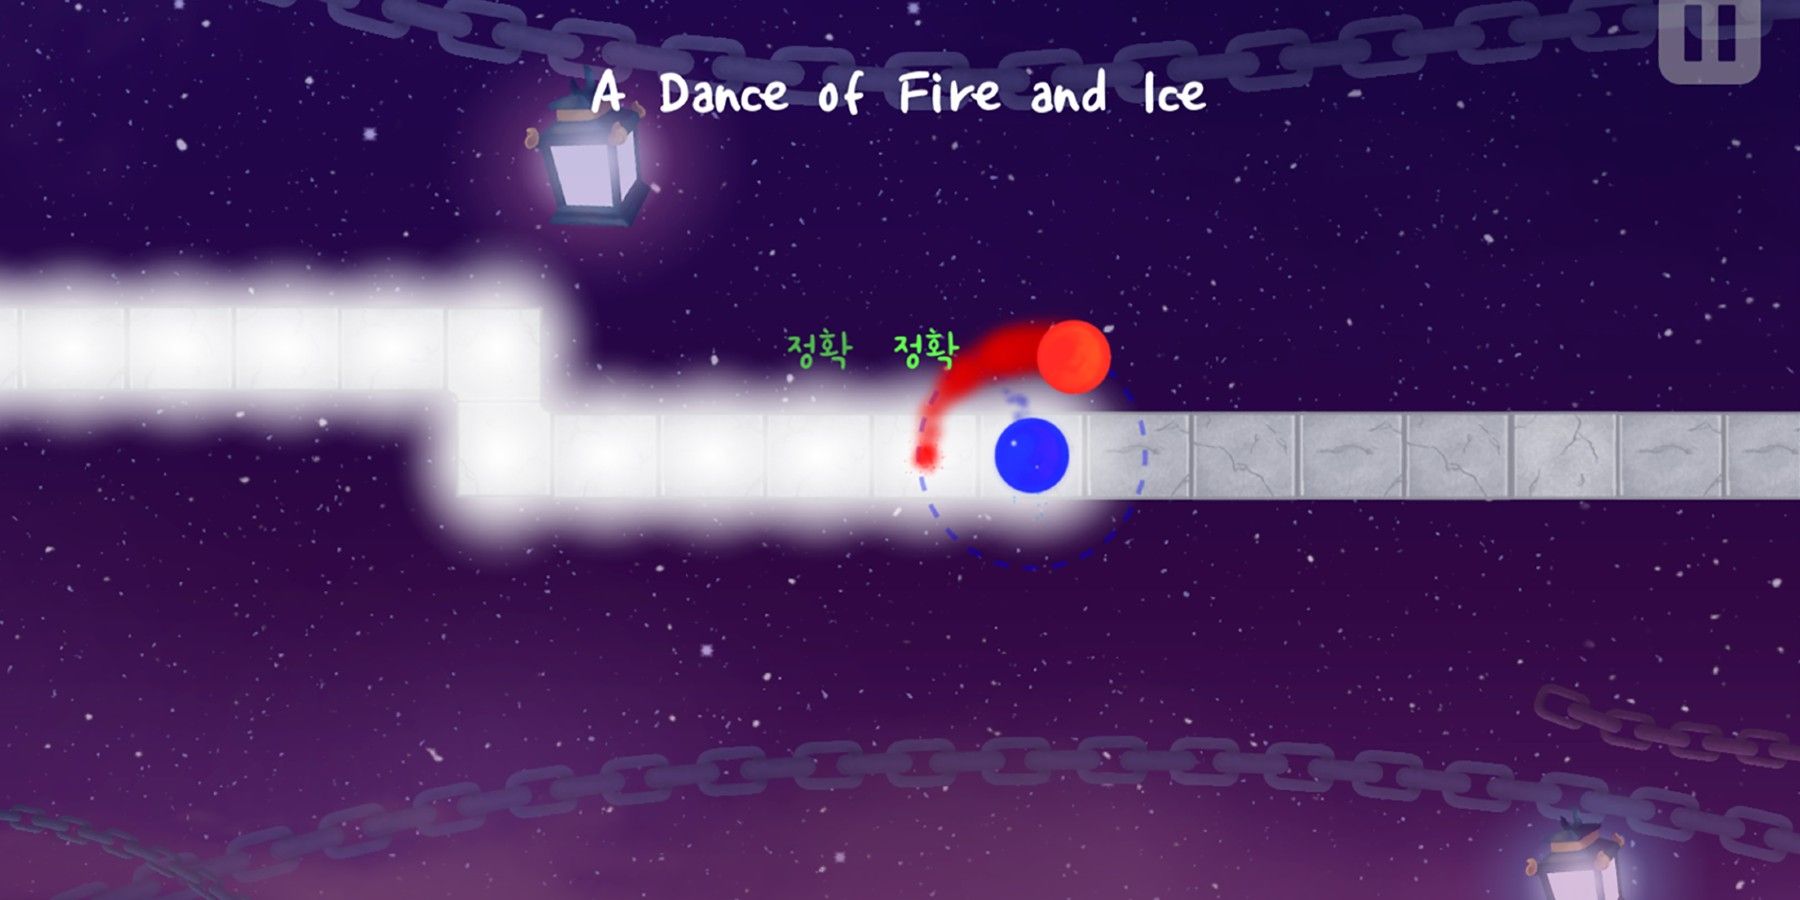 A Dance of Fire and Ice mobile gameplay pathway